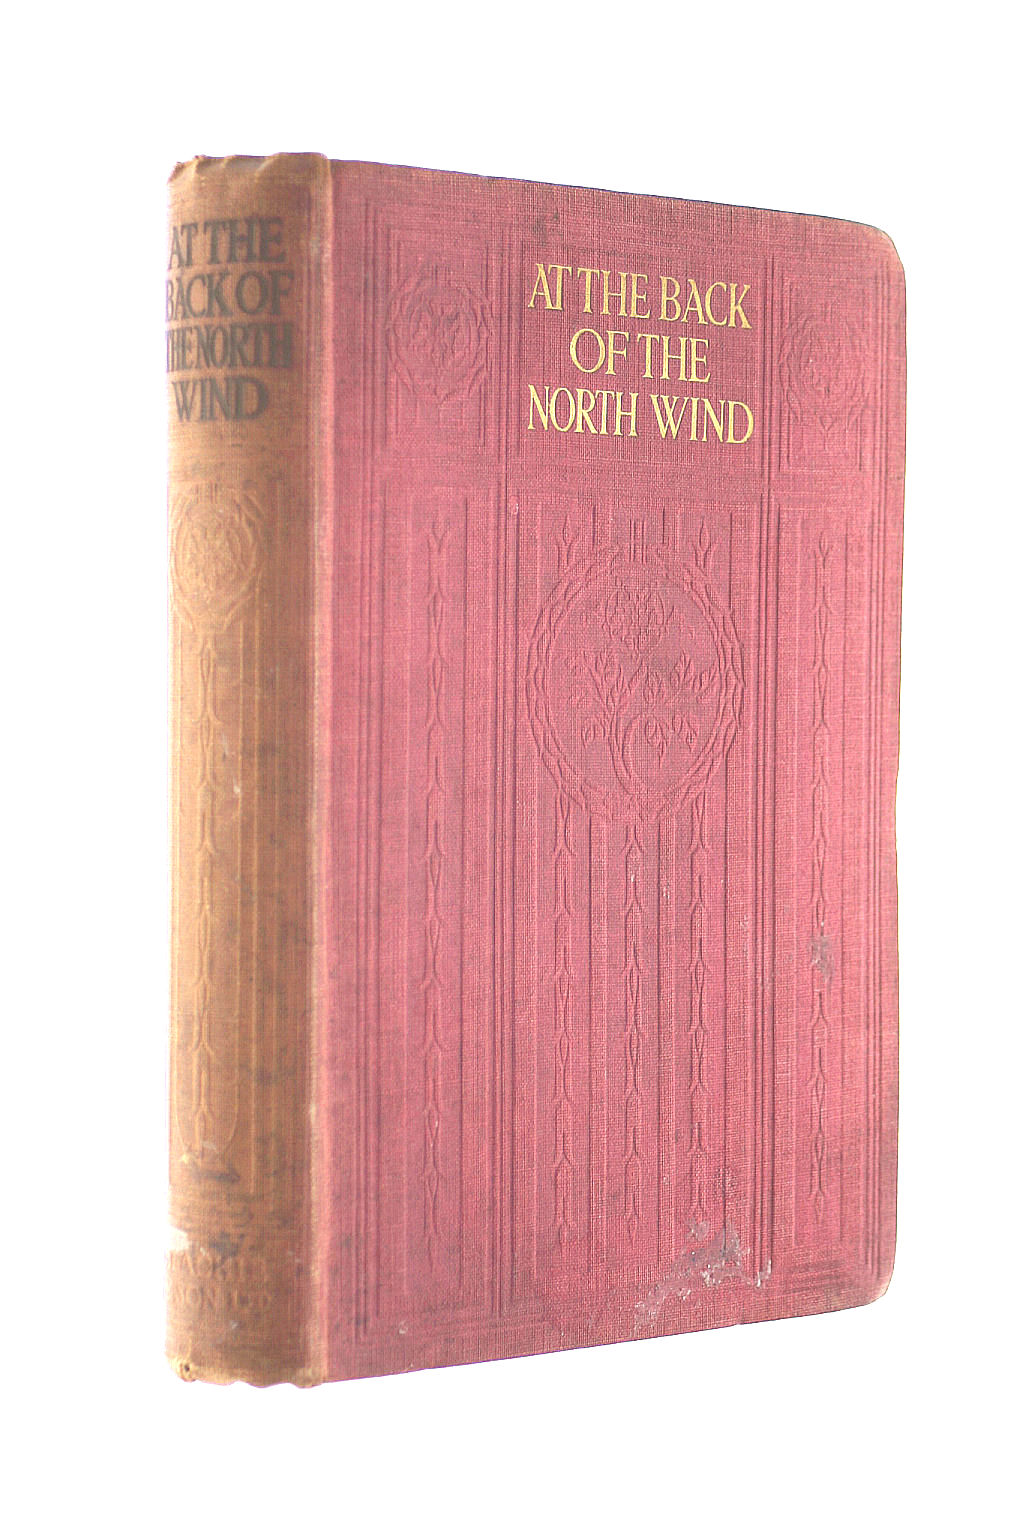 GEORGE MACDONALD - At the Back of the North Wind